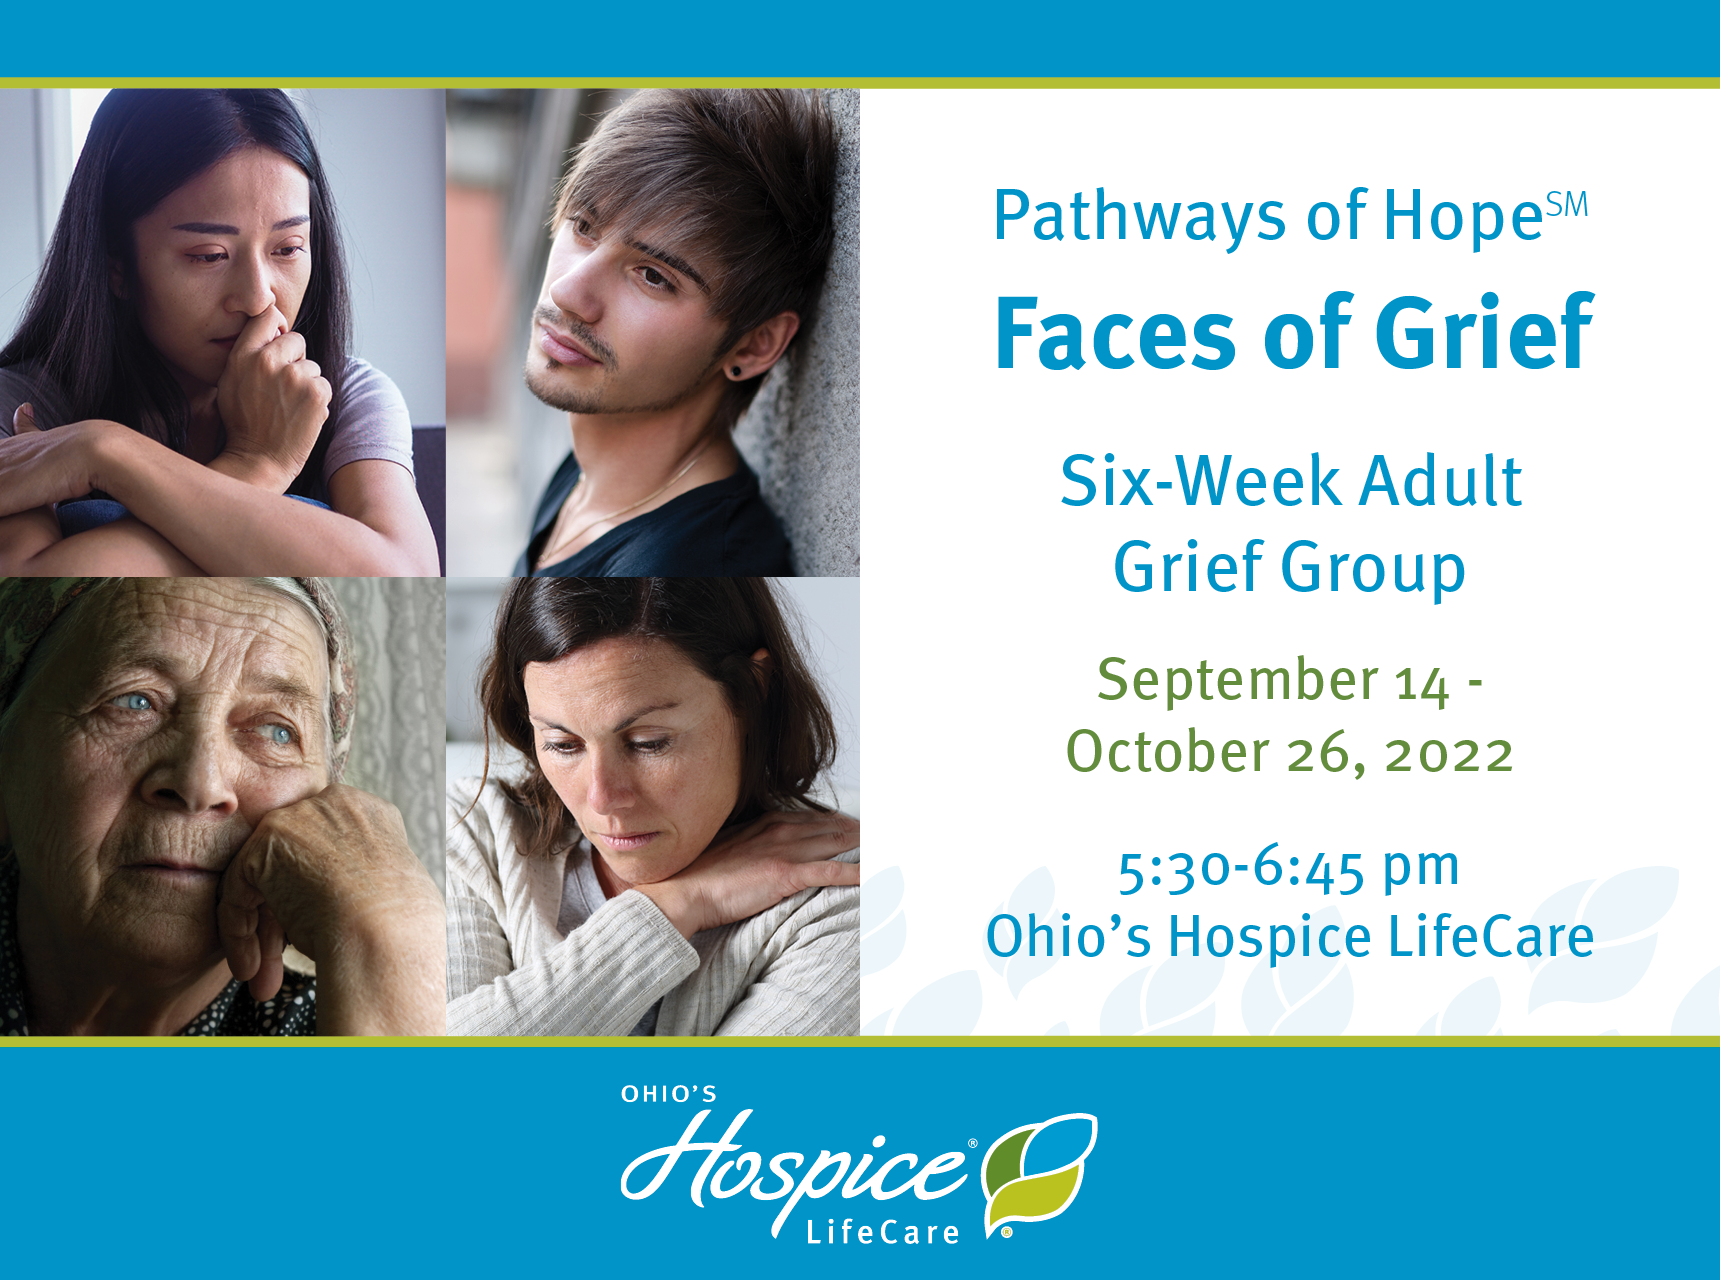 Ohio's Hospice LifeCare Offers Six-Week Faces of Grief Workshop